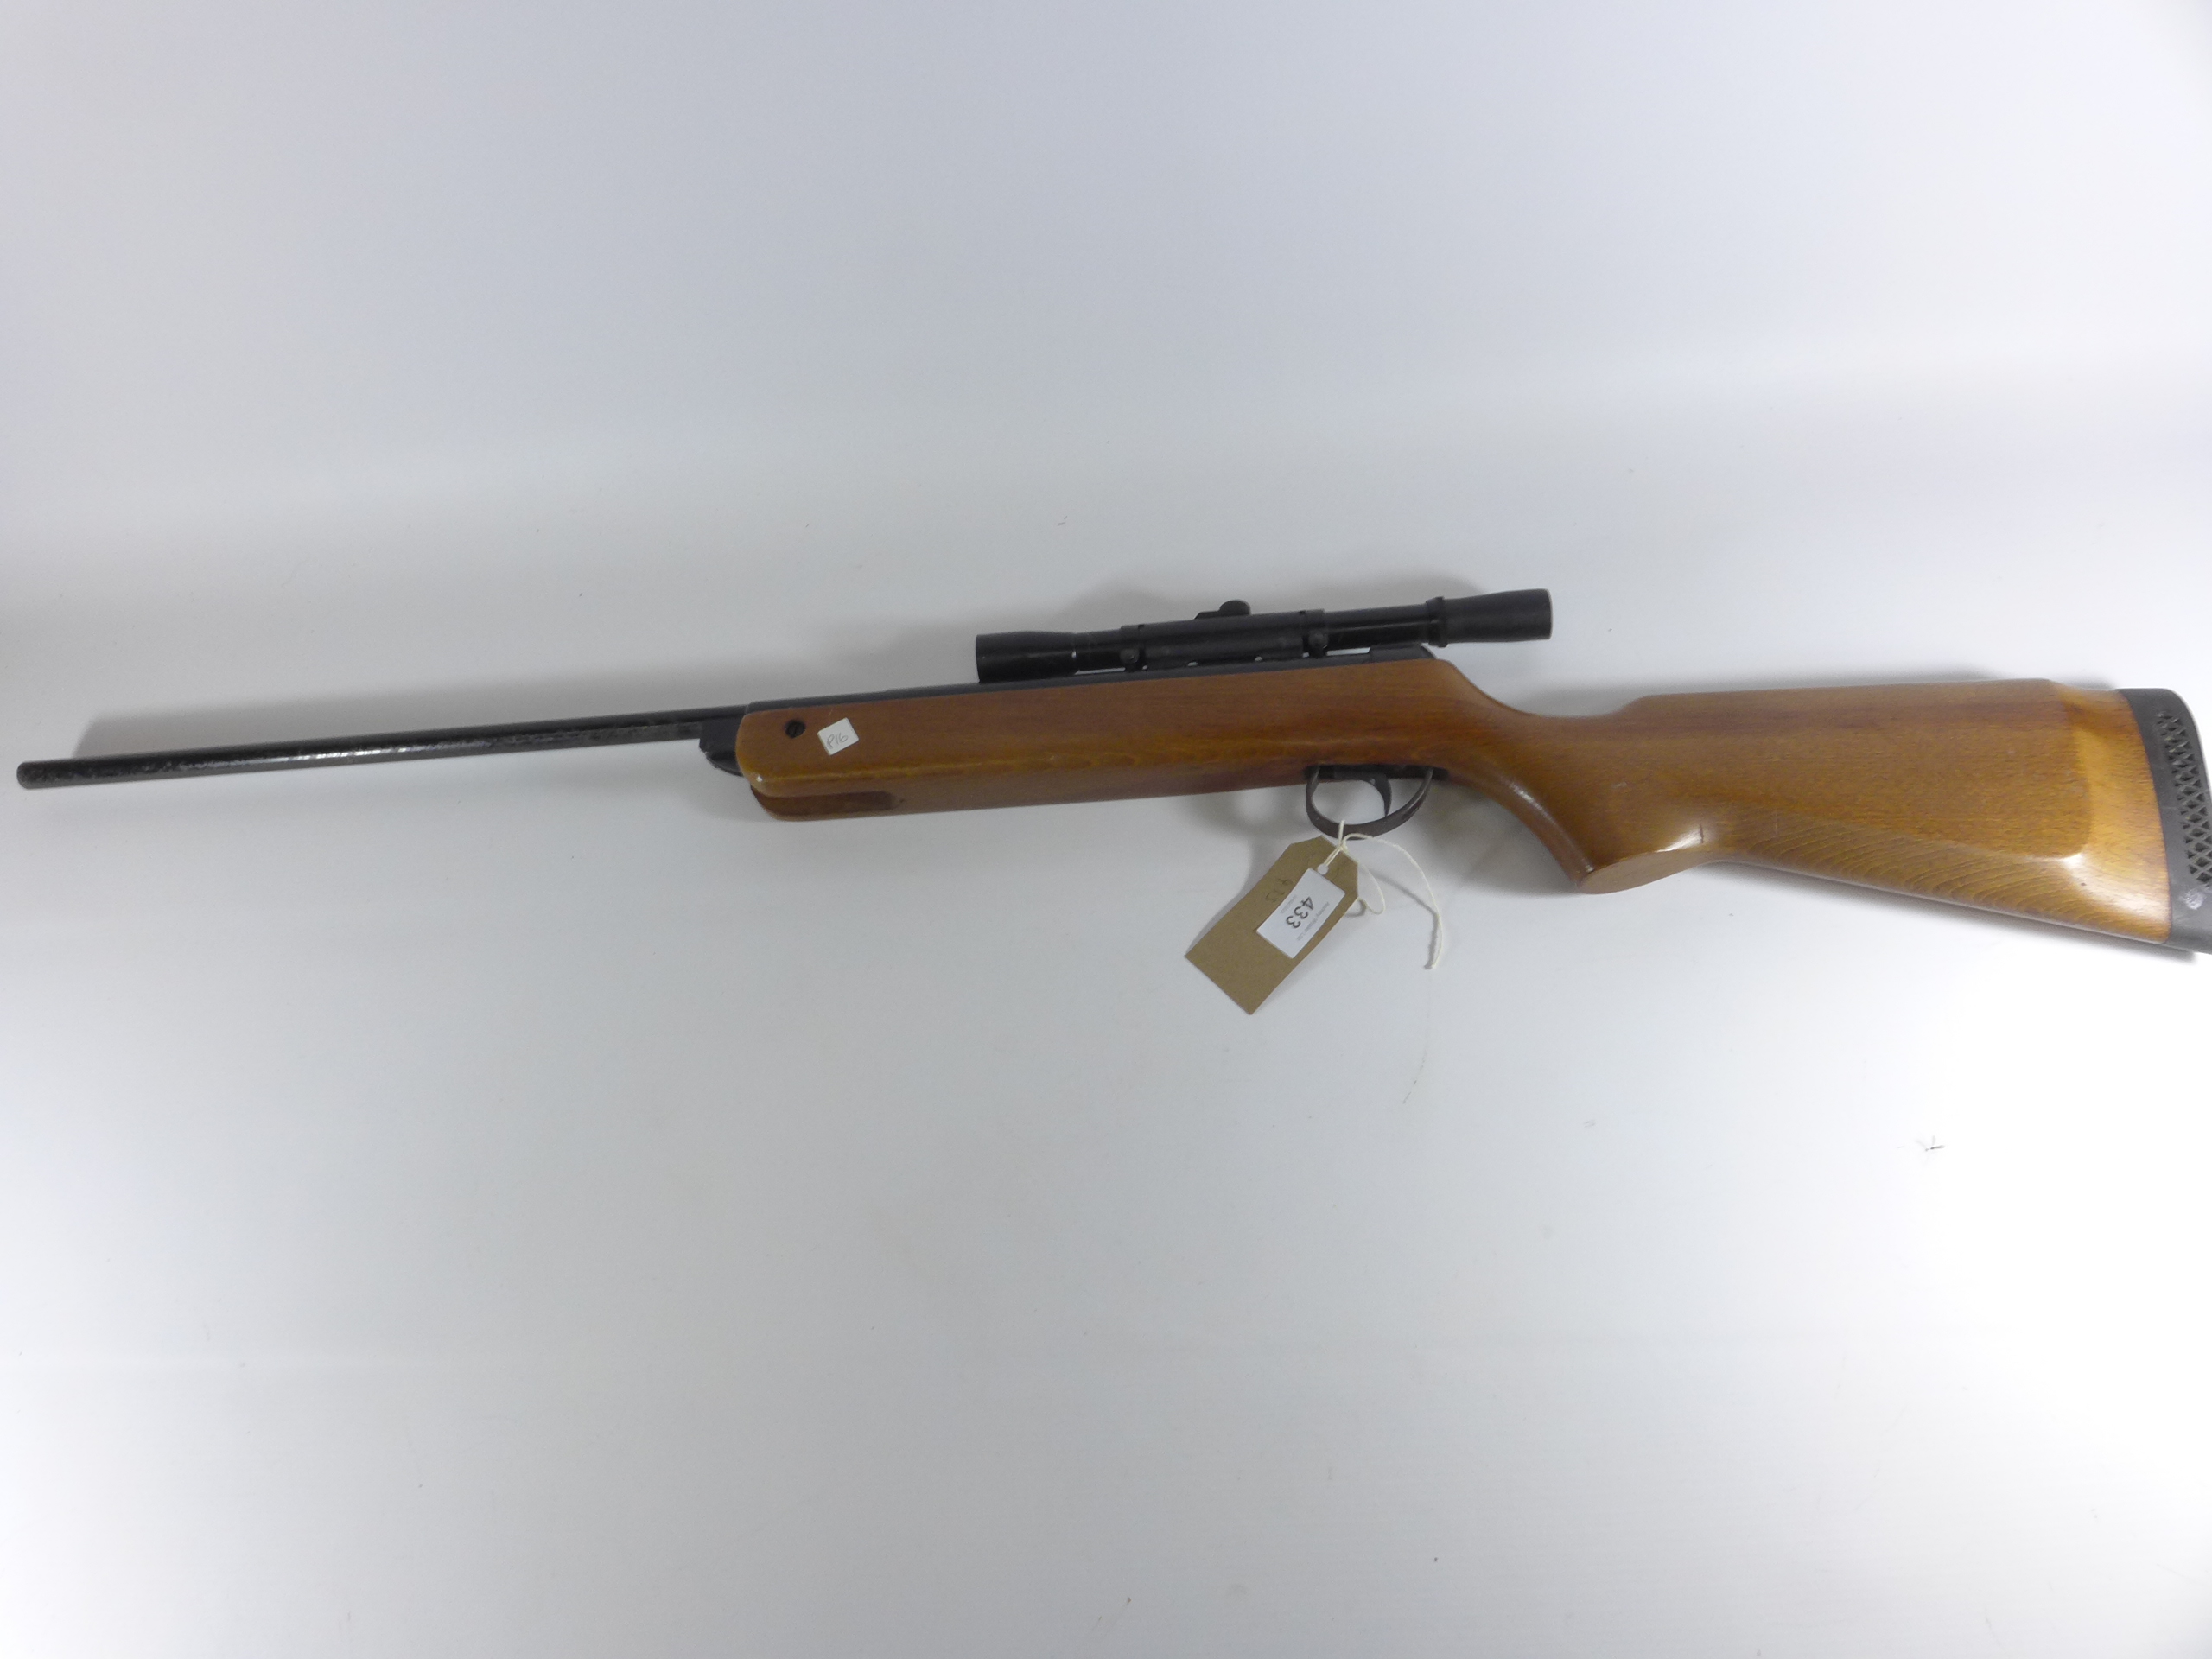 A BSA METEOR .22 CALIBRE AIR RIFLE, 47CM BARREL, WITH TELESCOPIC SIGHTS - Image 3 of 4